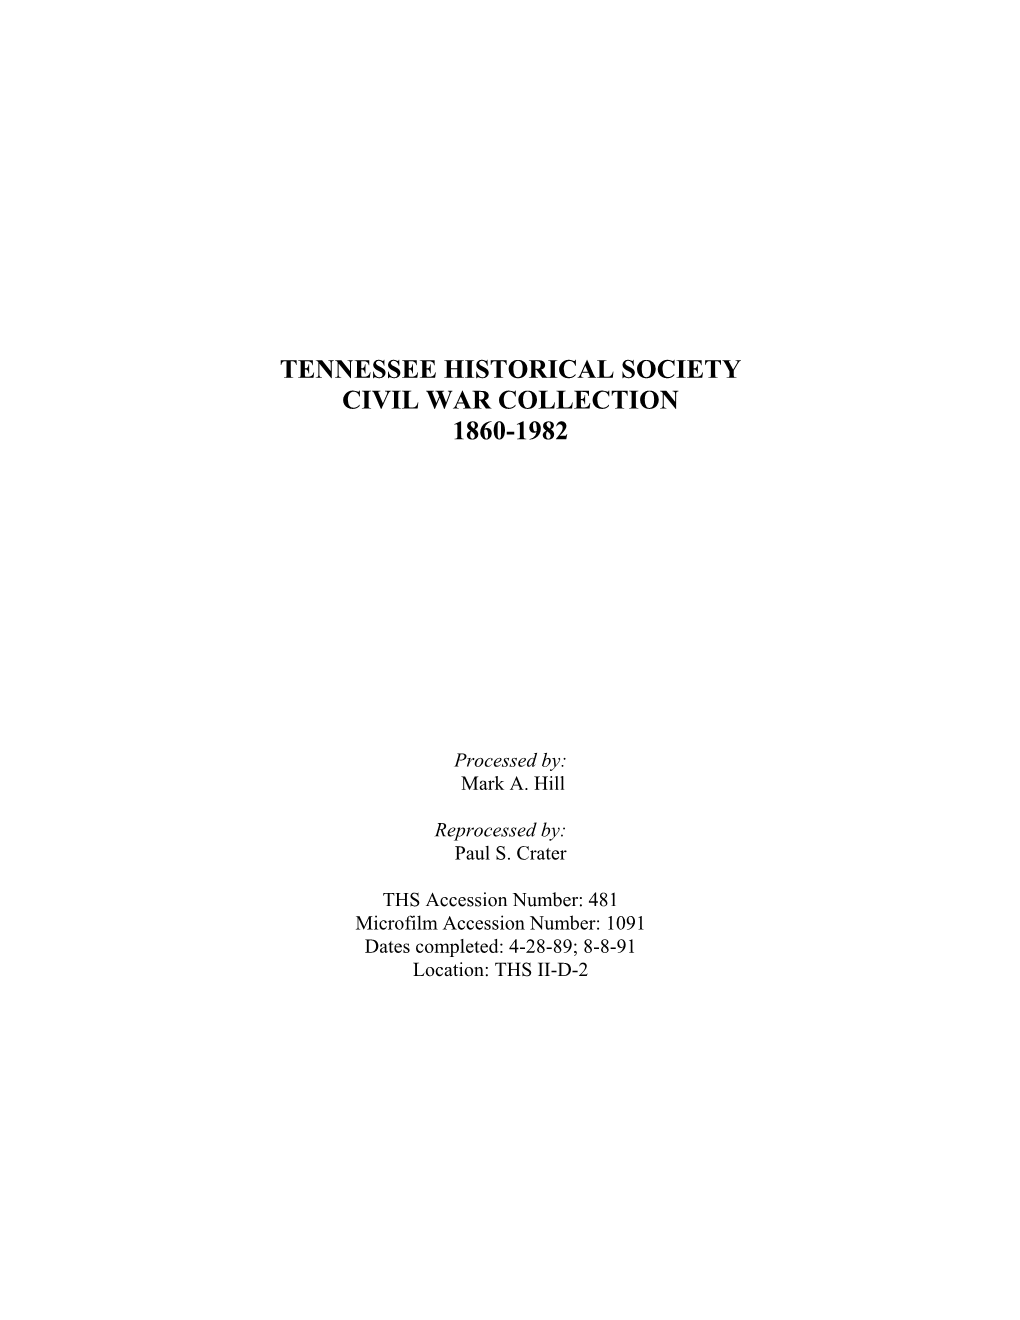 Tennessee Historical Society Civil War Collection 1860-1982